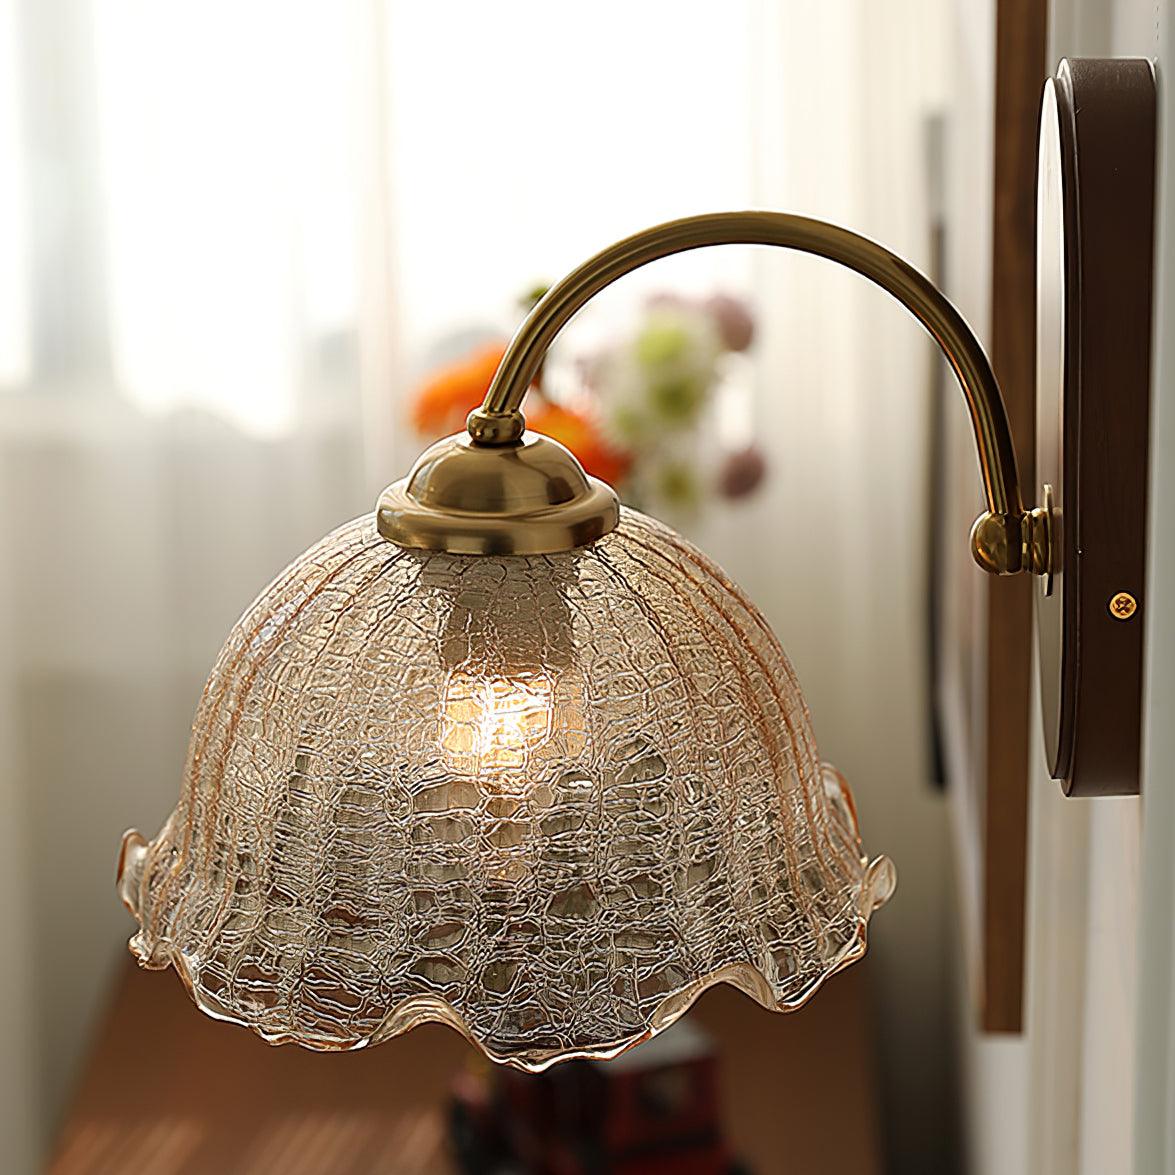 VINTAGE ANTIQUE BRASS WALL LIGHT WITH REEDED GLASS SHADE